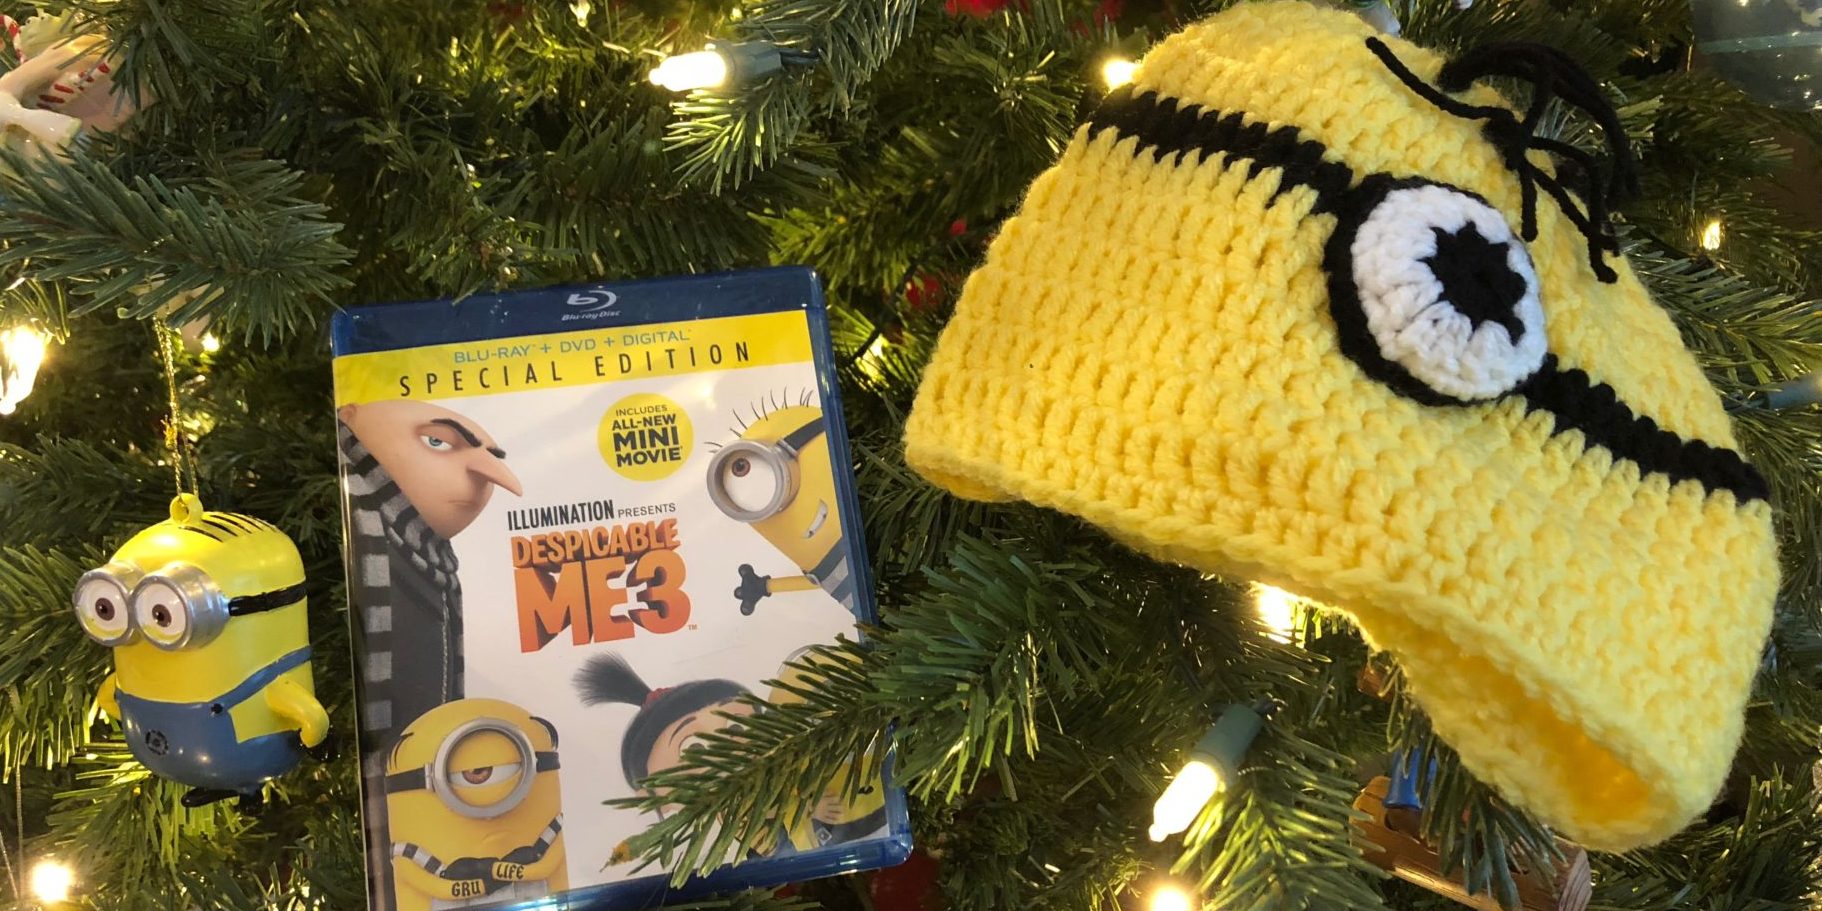 All I want for Christmas is Despicable Me 3  Image: Dakster Sullivan